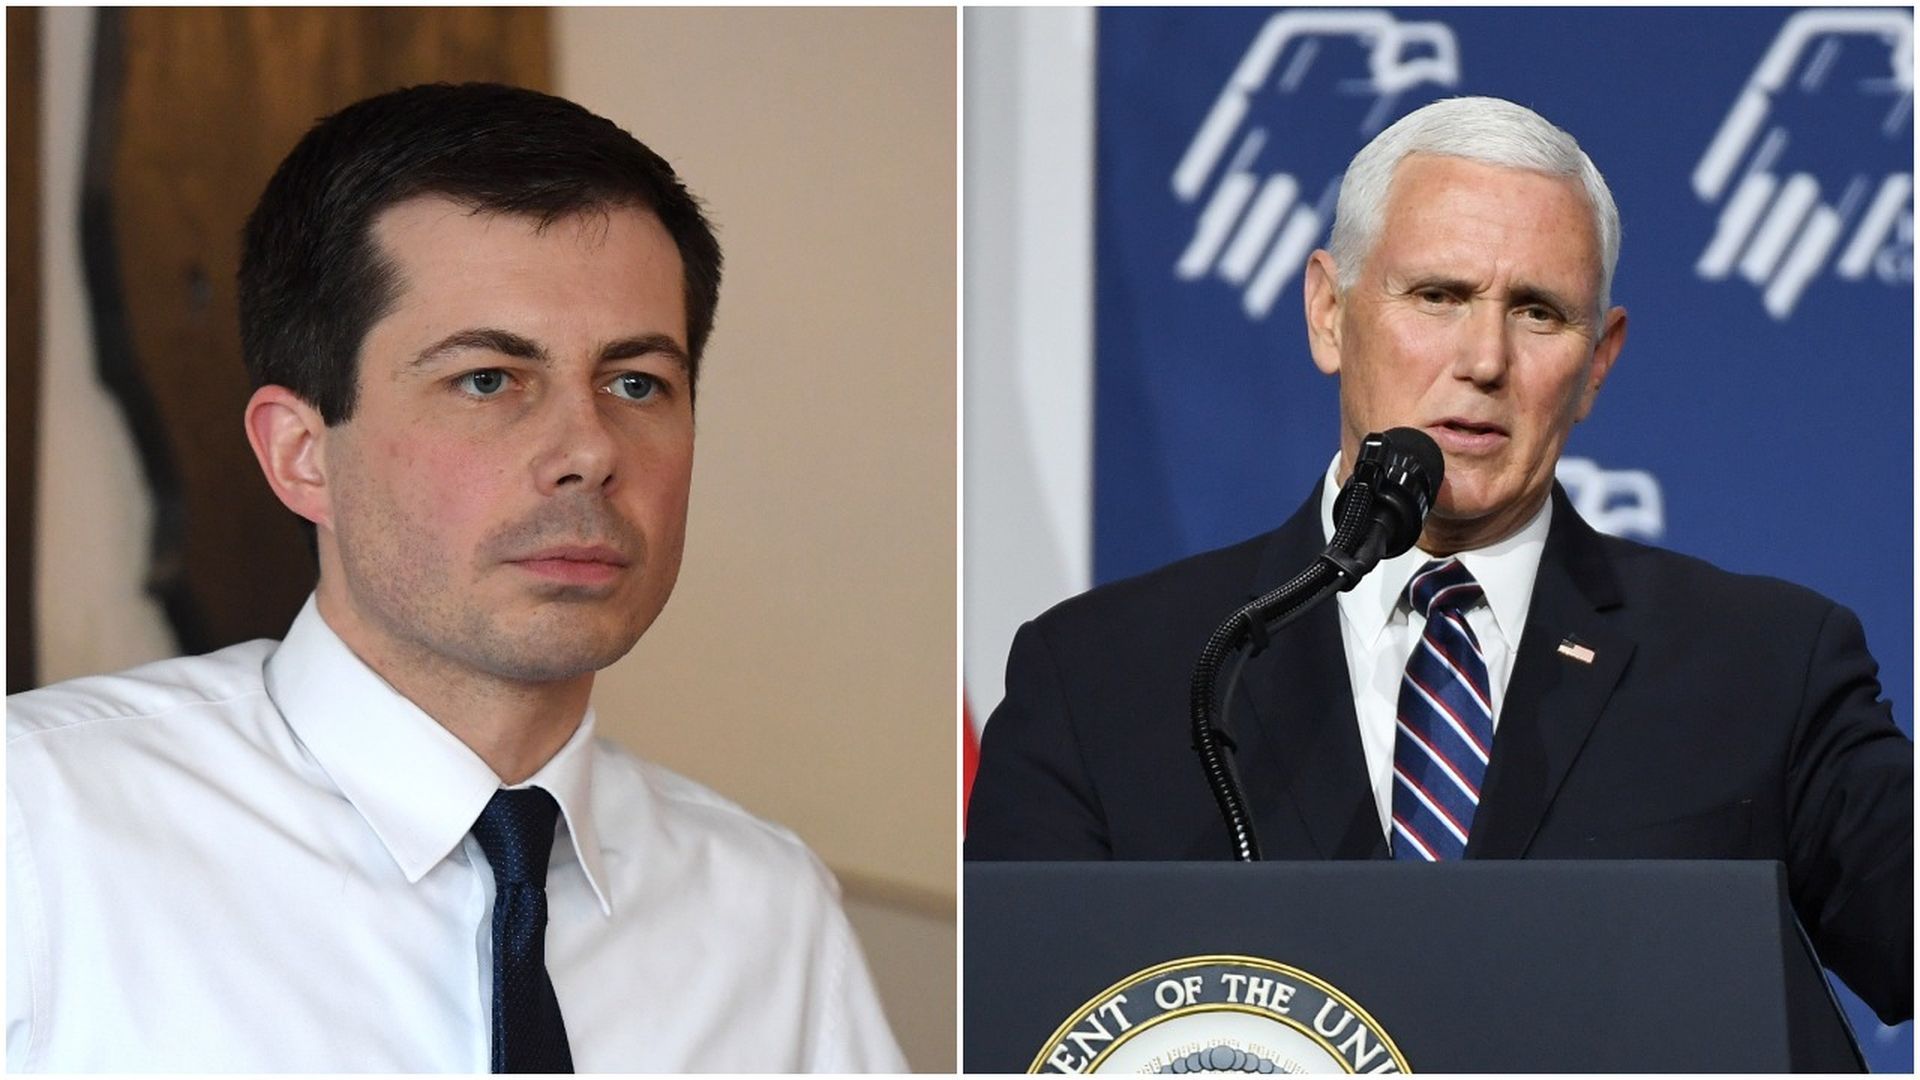 This image is a split screen of Buttigieg, who stands and listens in a white shirt and tie, and Mike Pence, who stands behind a podium and speaks. 